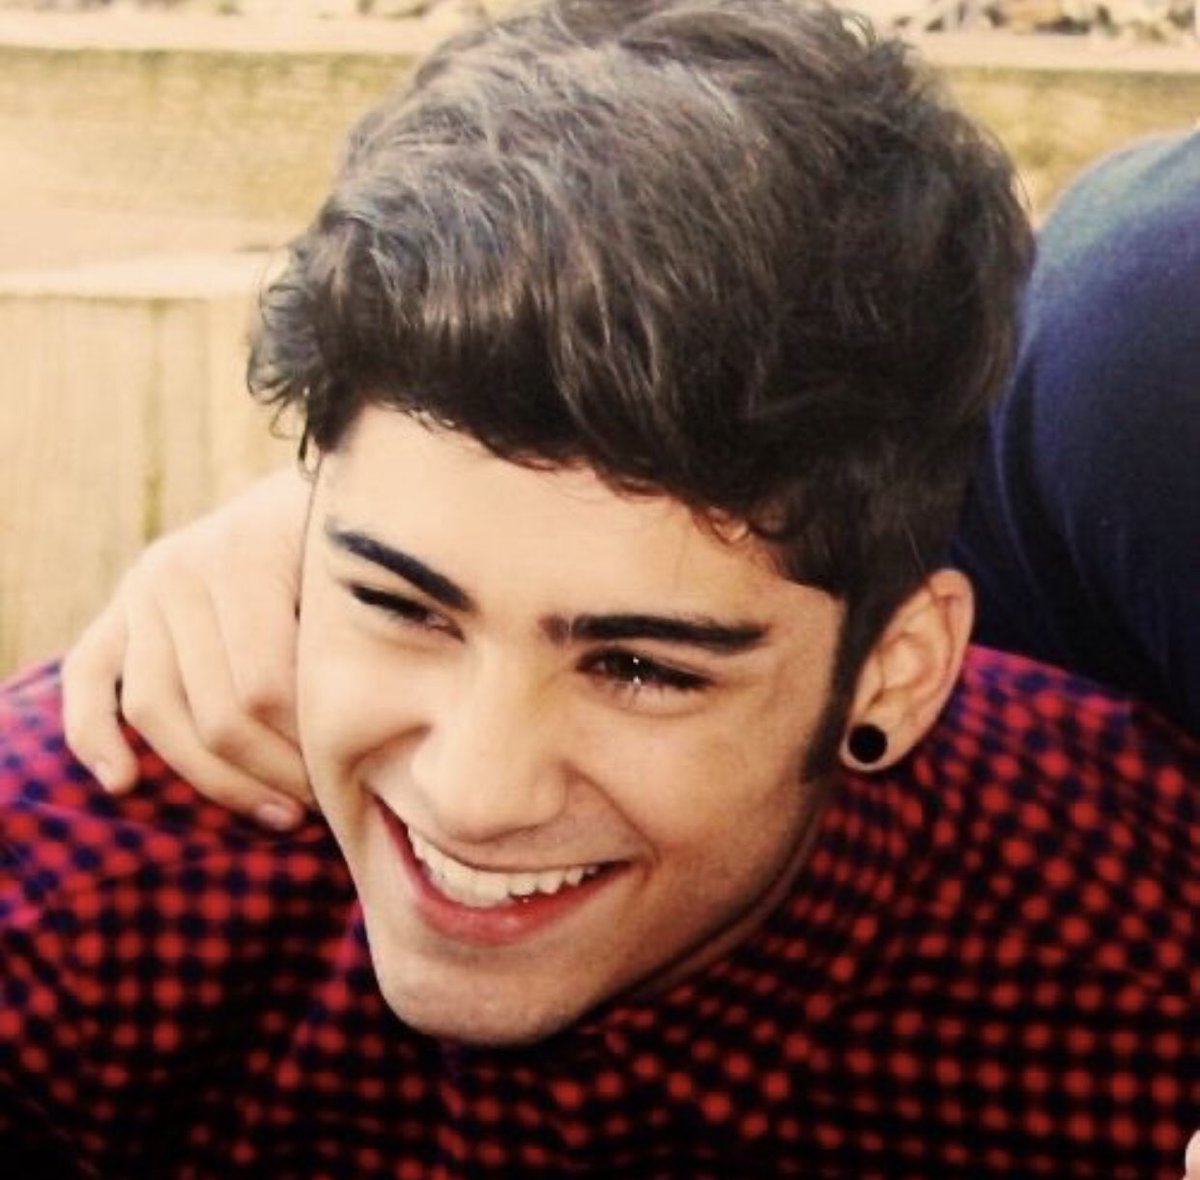 Thread by @haloforevermore, zayn smiling; a comfort thread [...]